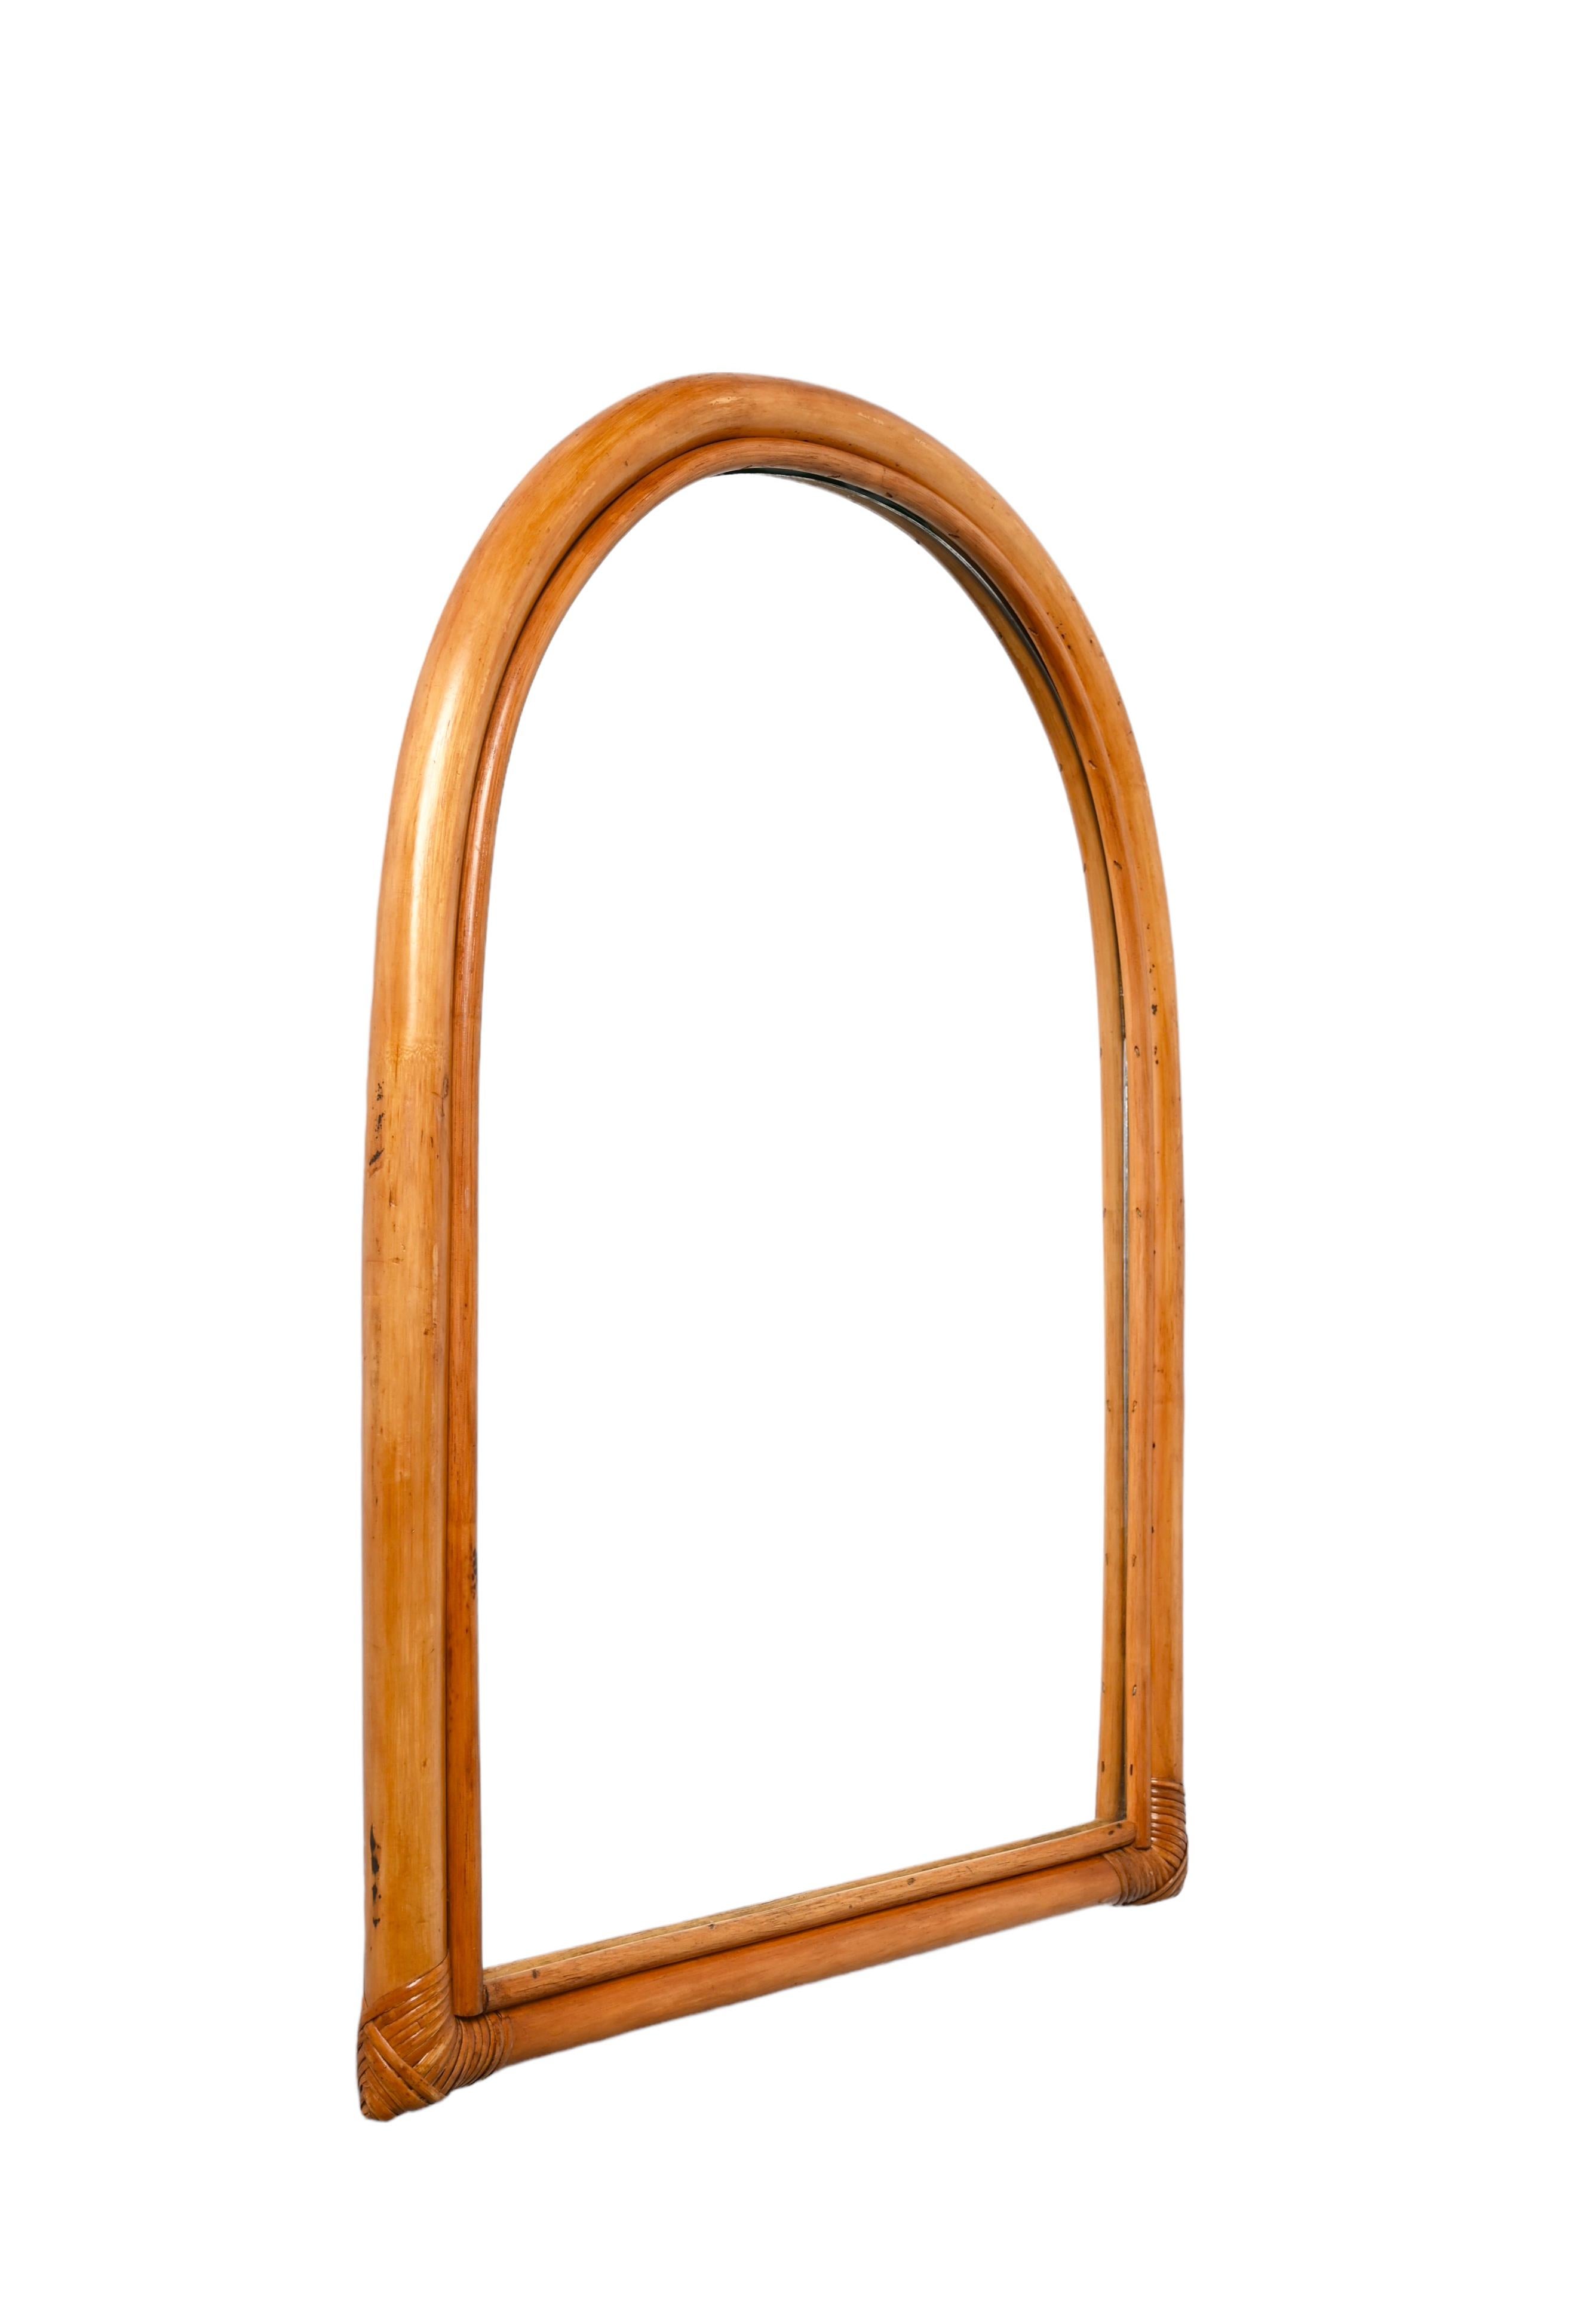 Midcentury Italian Arch-Shaped Mirror with Double Bamboo Wicker Frame, 1970s 3